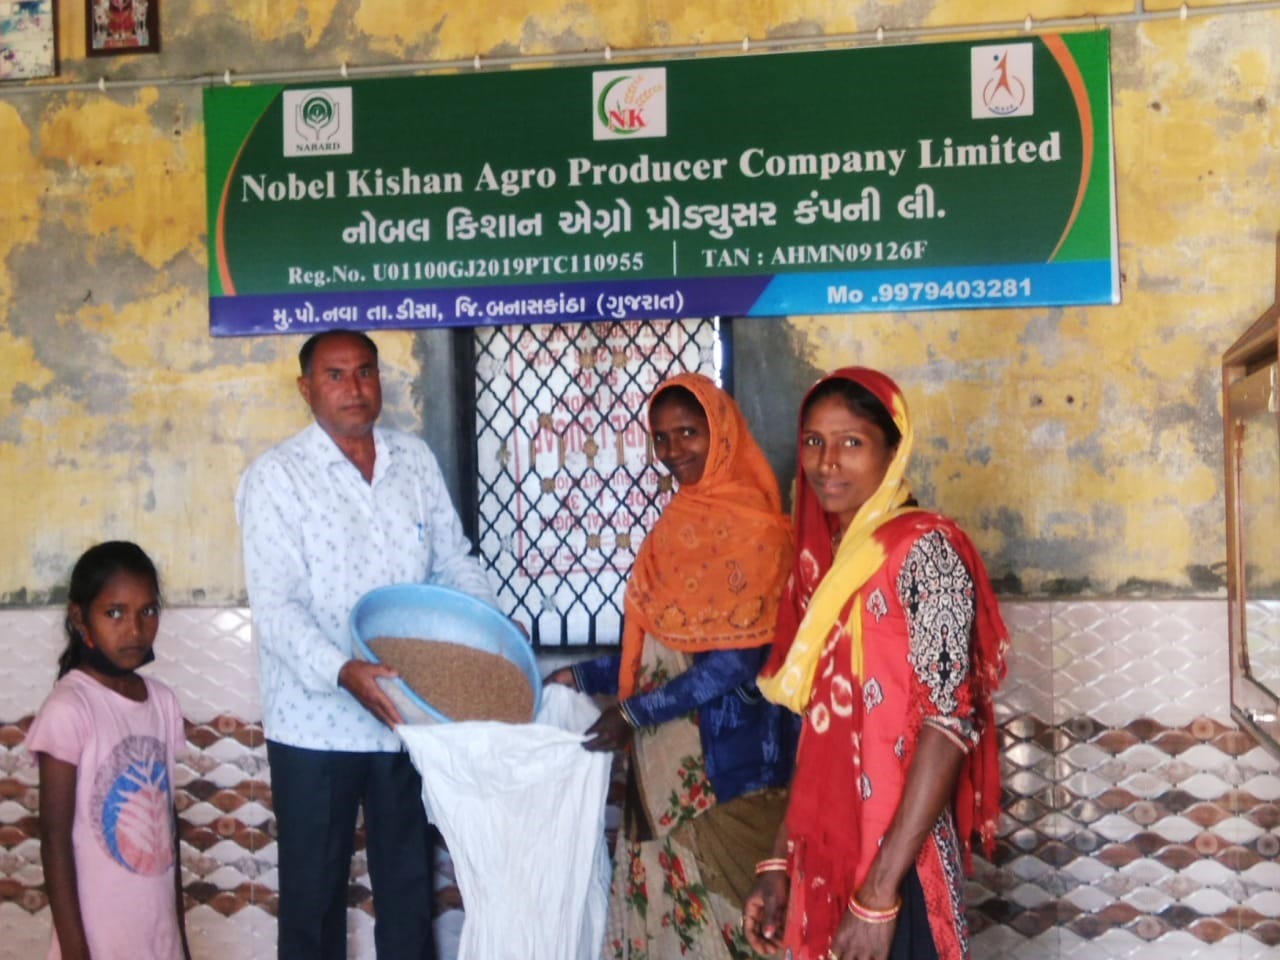 NABARD celebrated it’s 39th Foundation Day